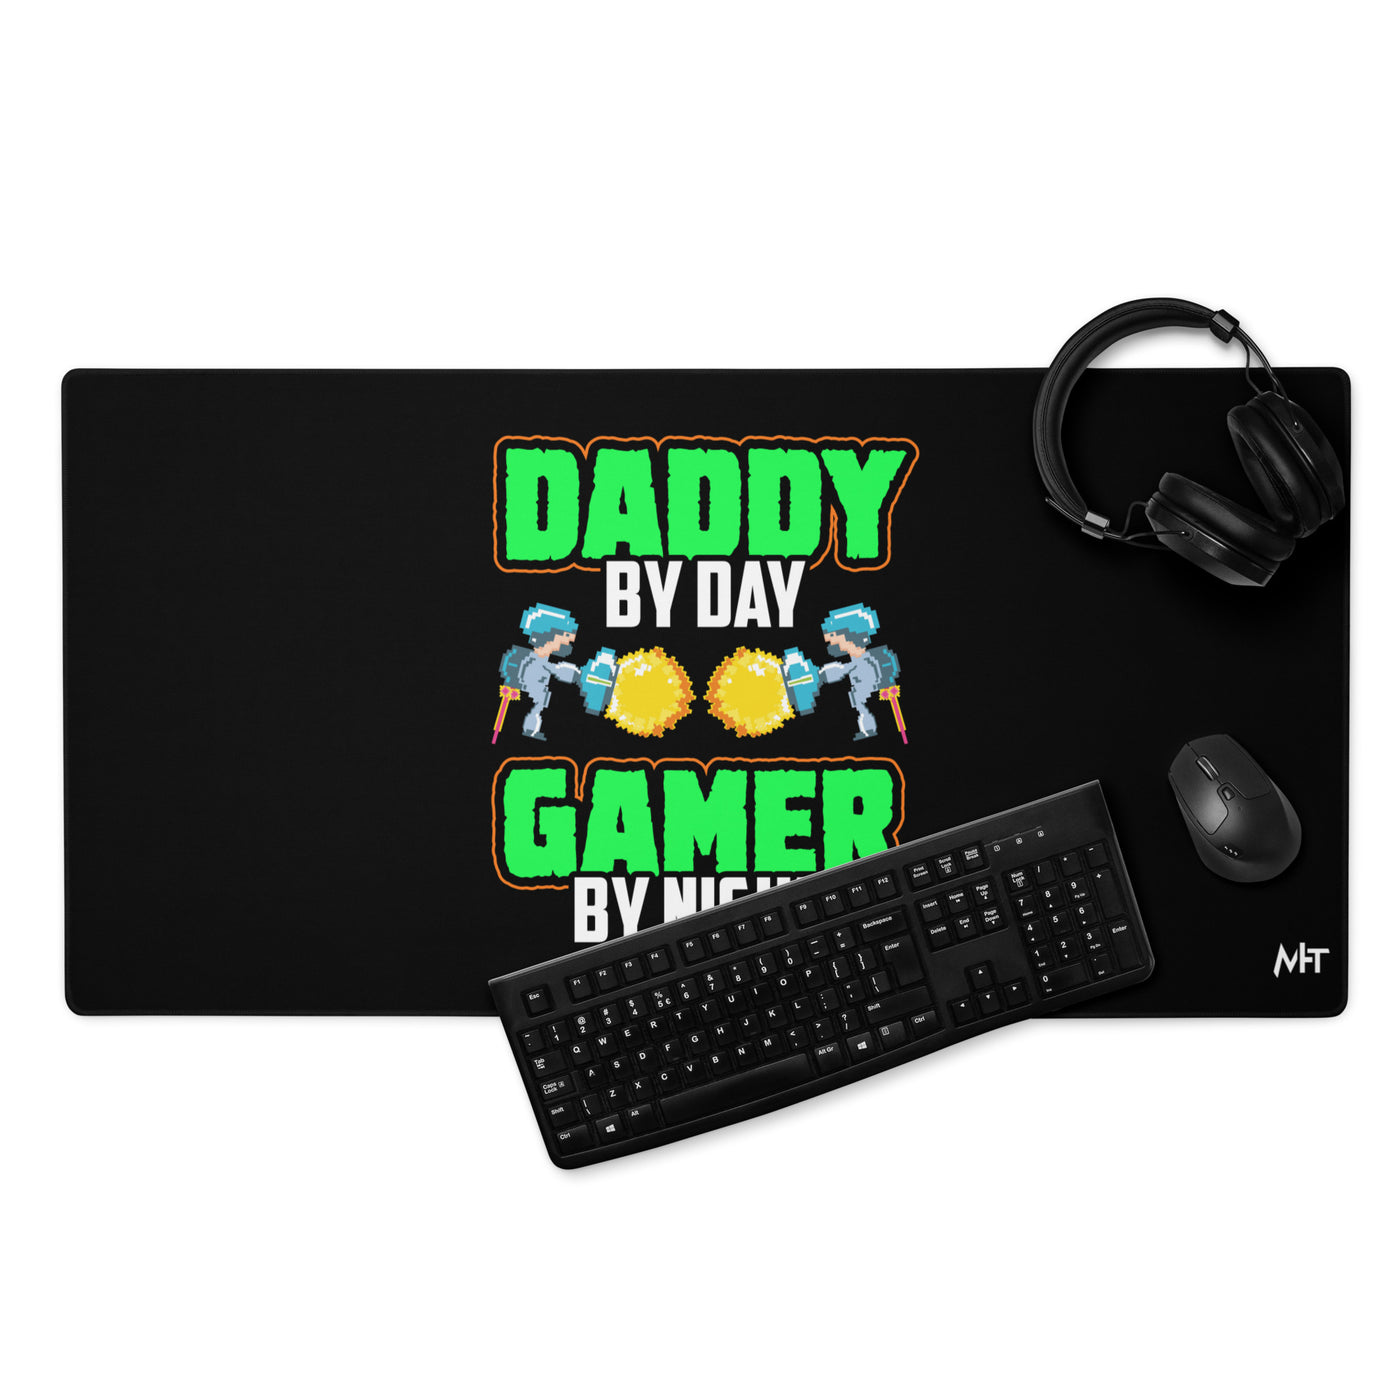 Daddy by Day, Gamer by Night ( Green text ) - Desk Mat